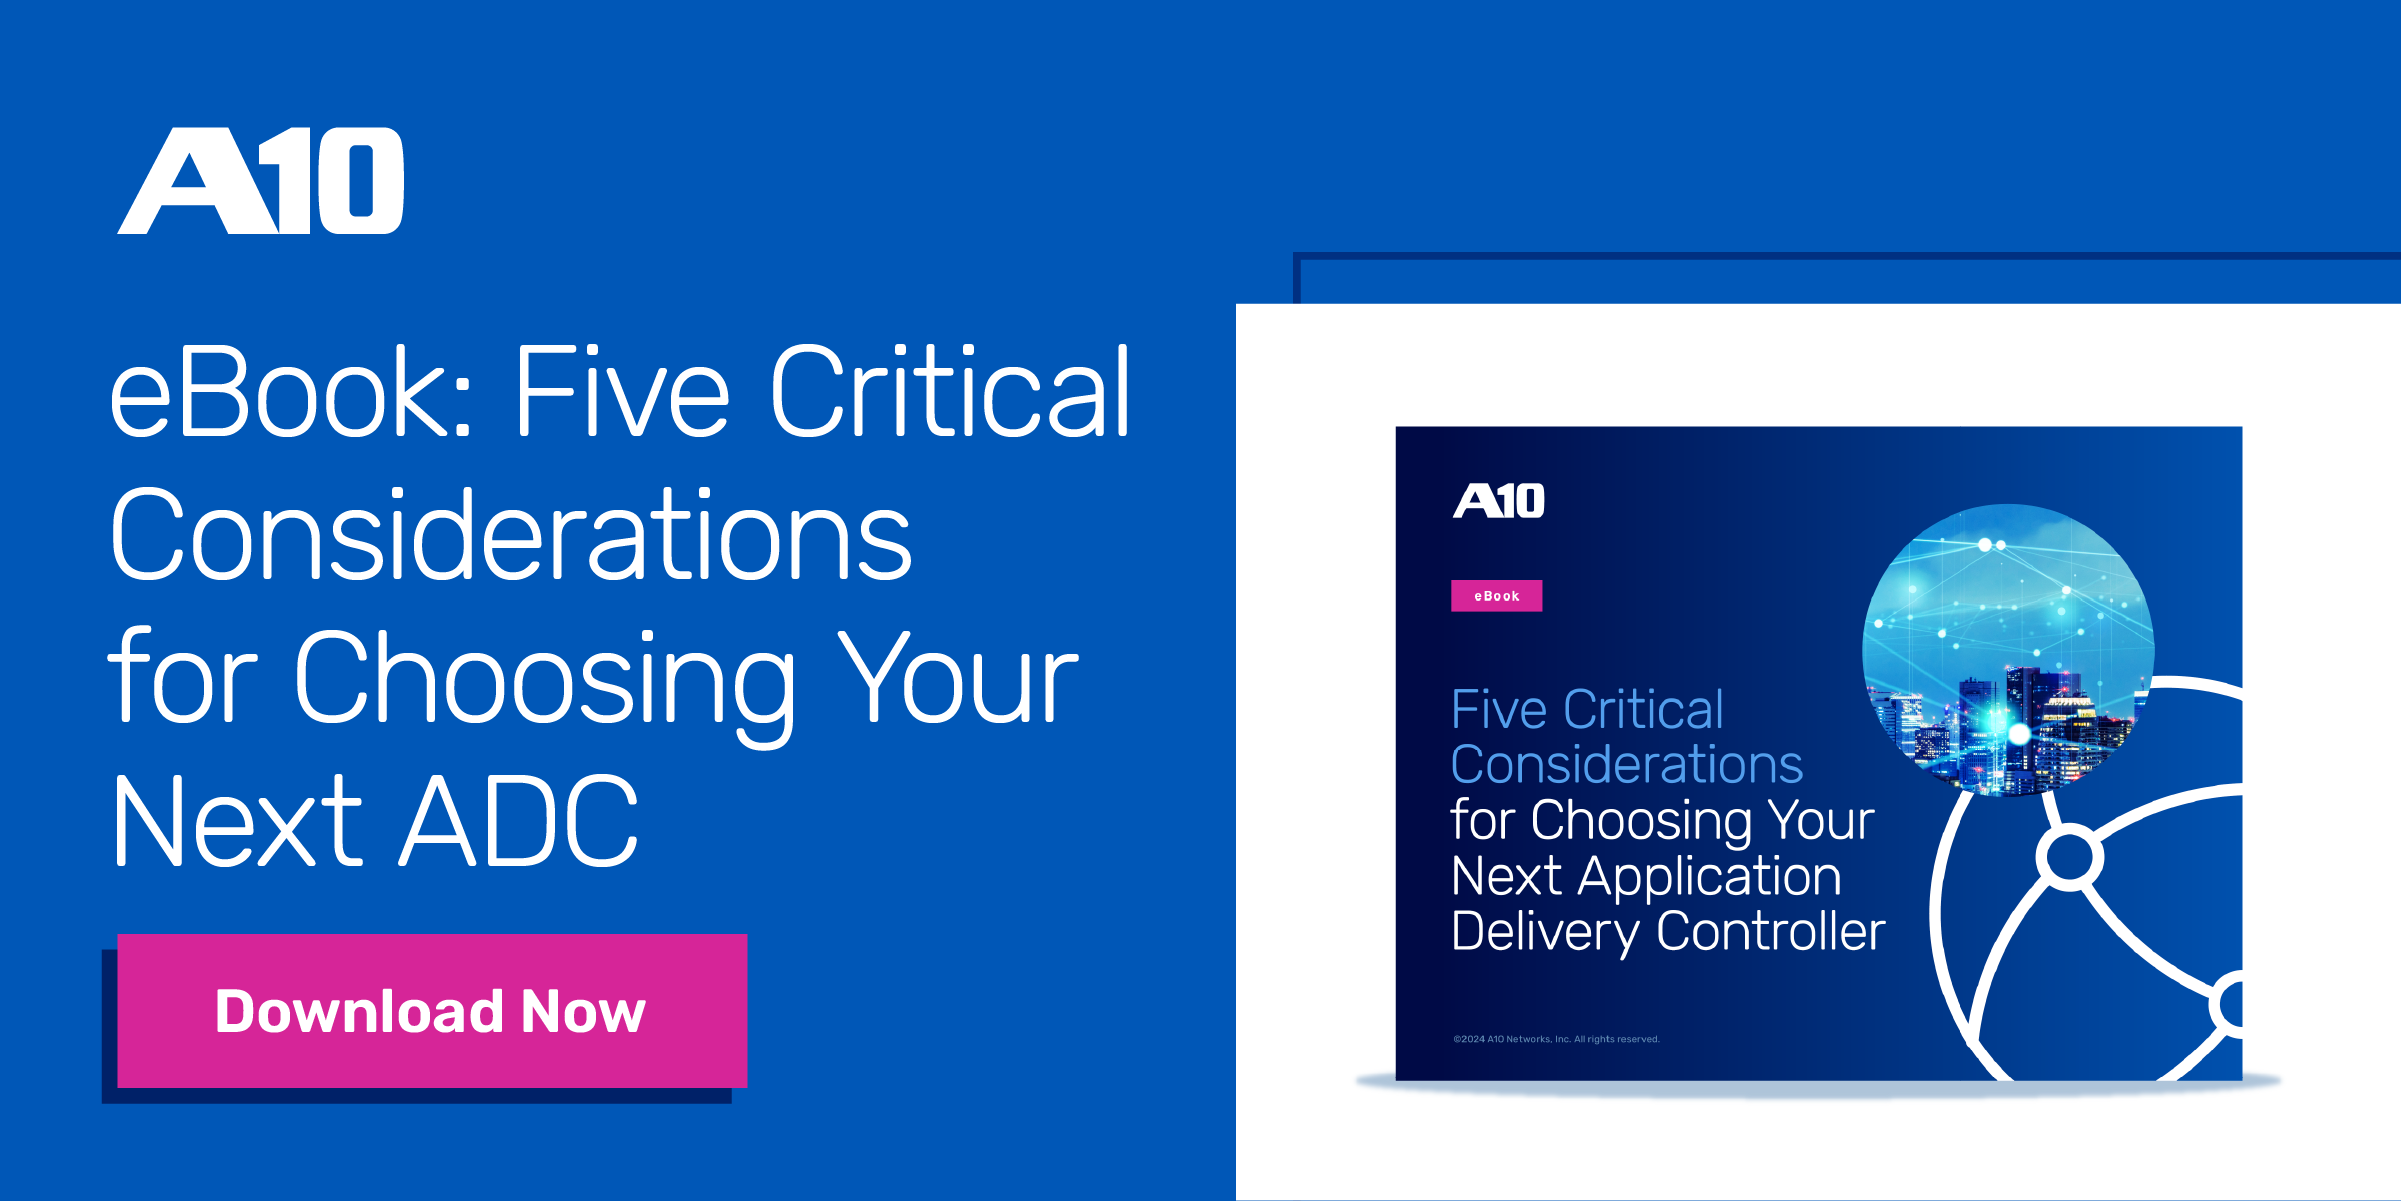 Preview of the Five Critical Considerations for Choosing Your Next Application Delivery Controller Ebook